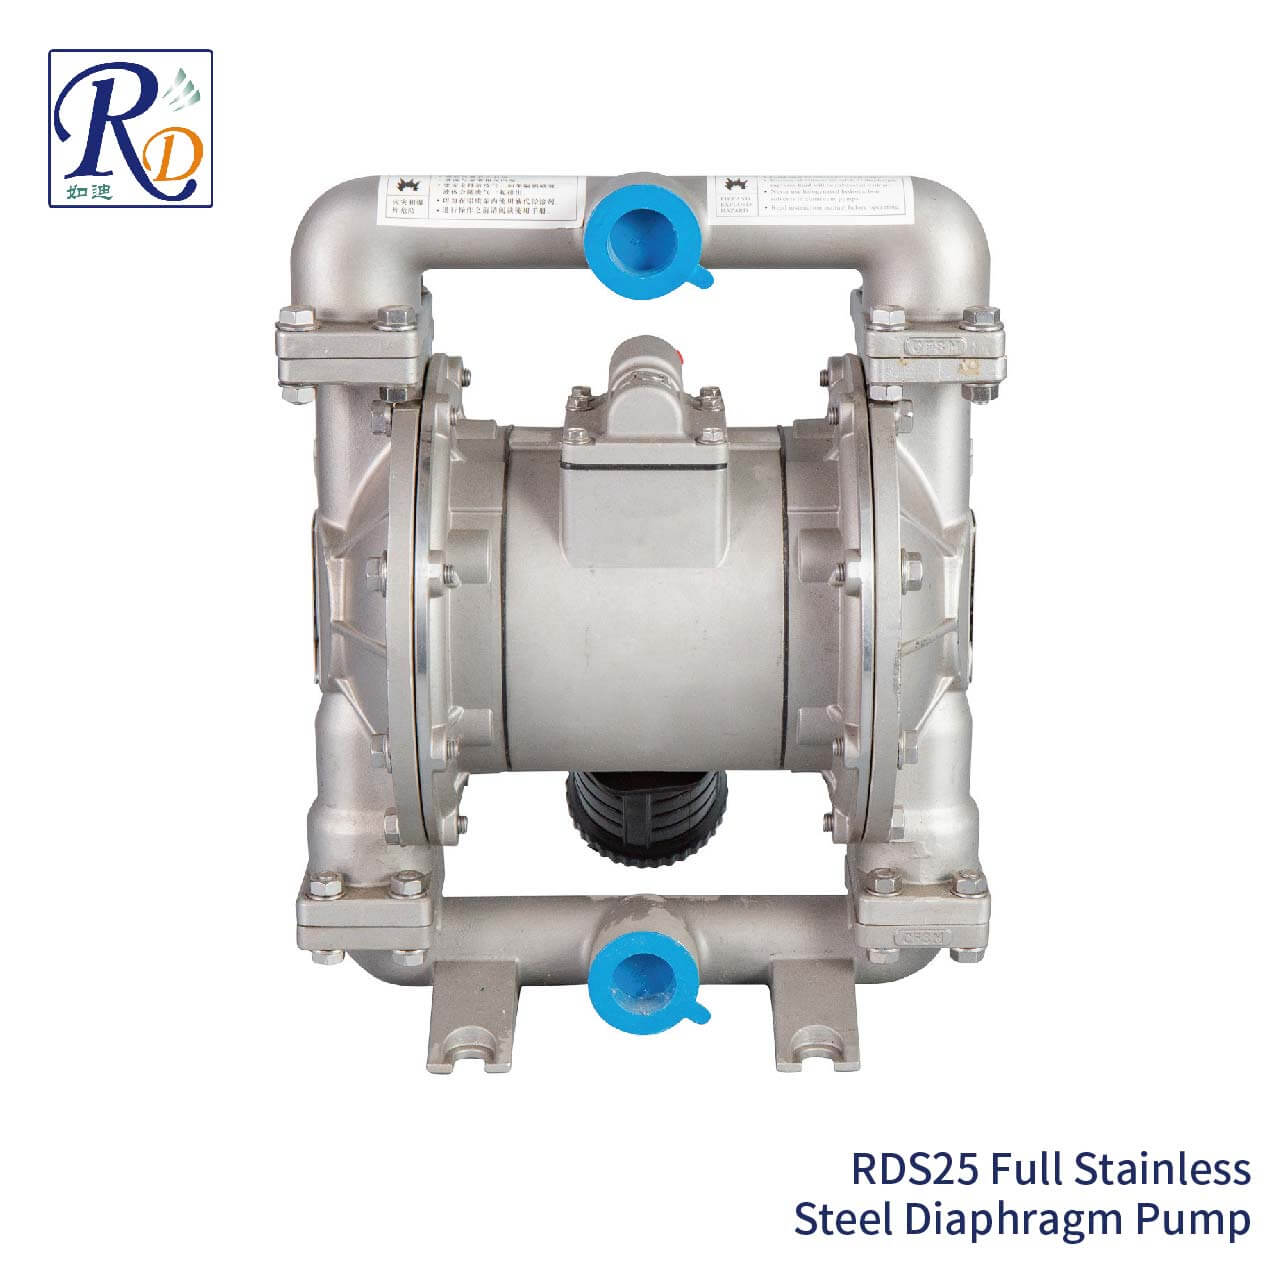 RDS25 Full Stainless Steel Diaphragm Pump